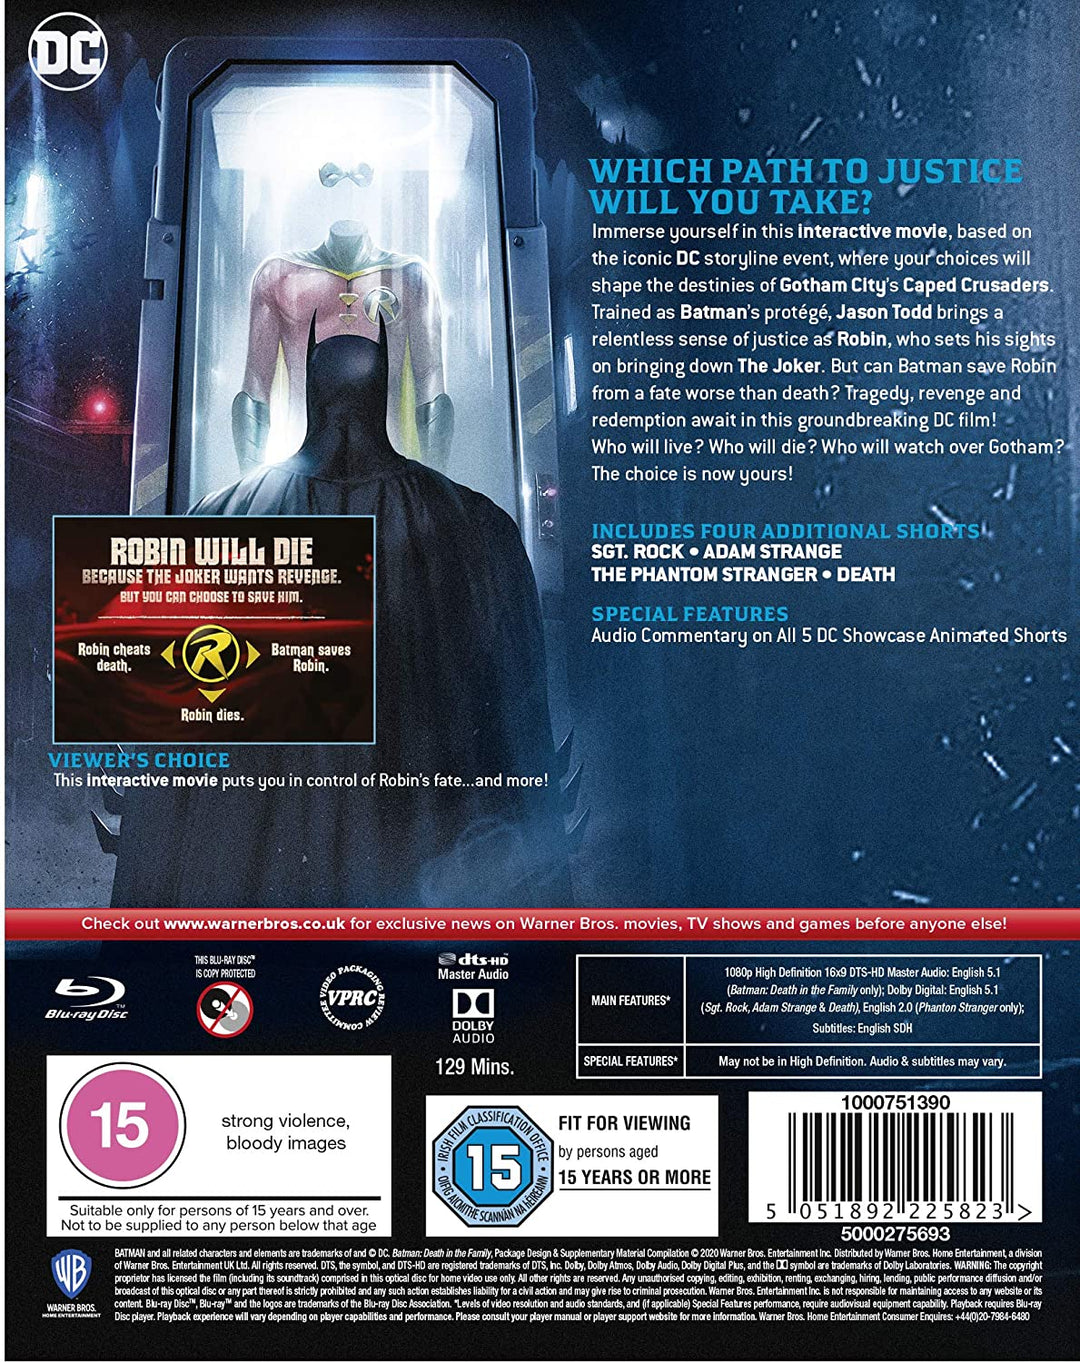 Batman: Death in the Family [2019] [Region Free] – Action/Animation [Blu-ray]